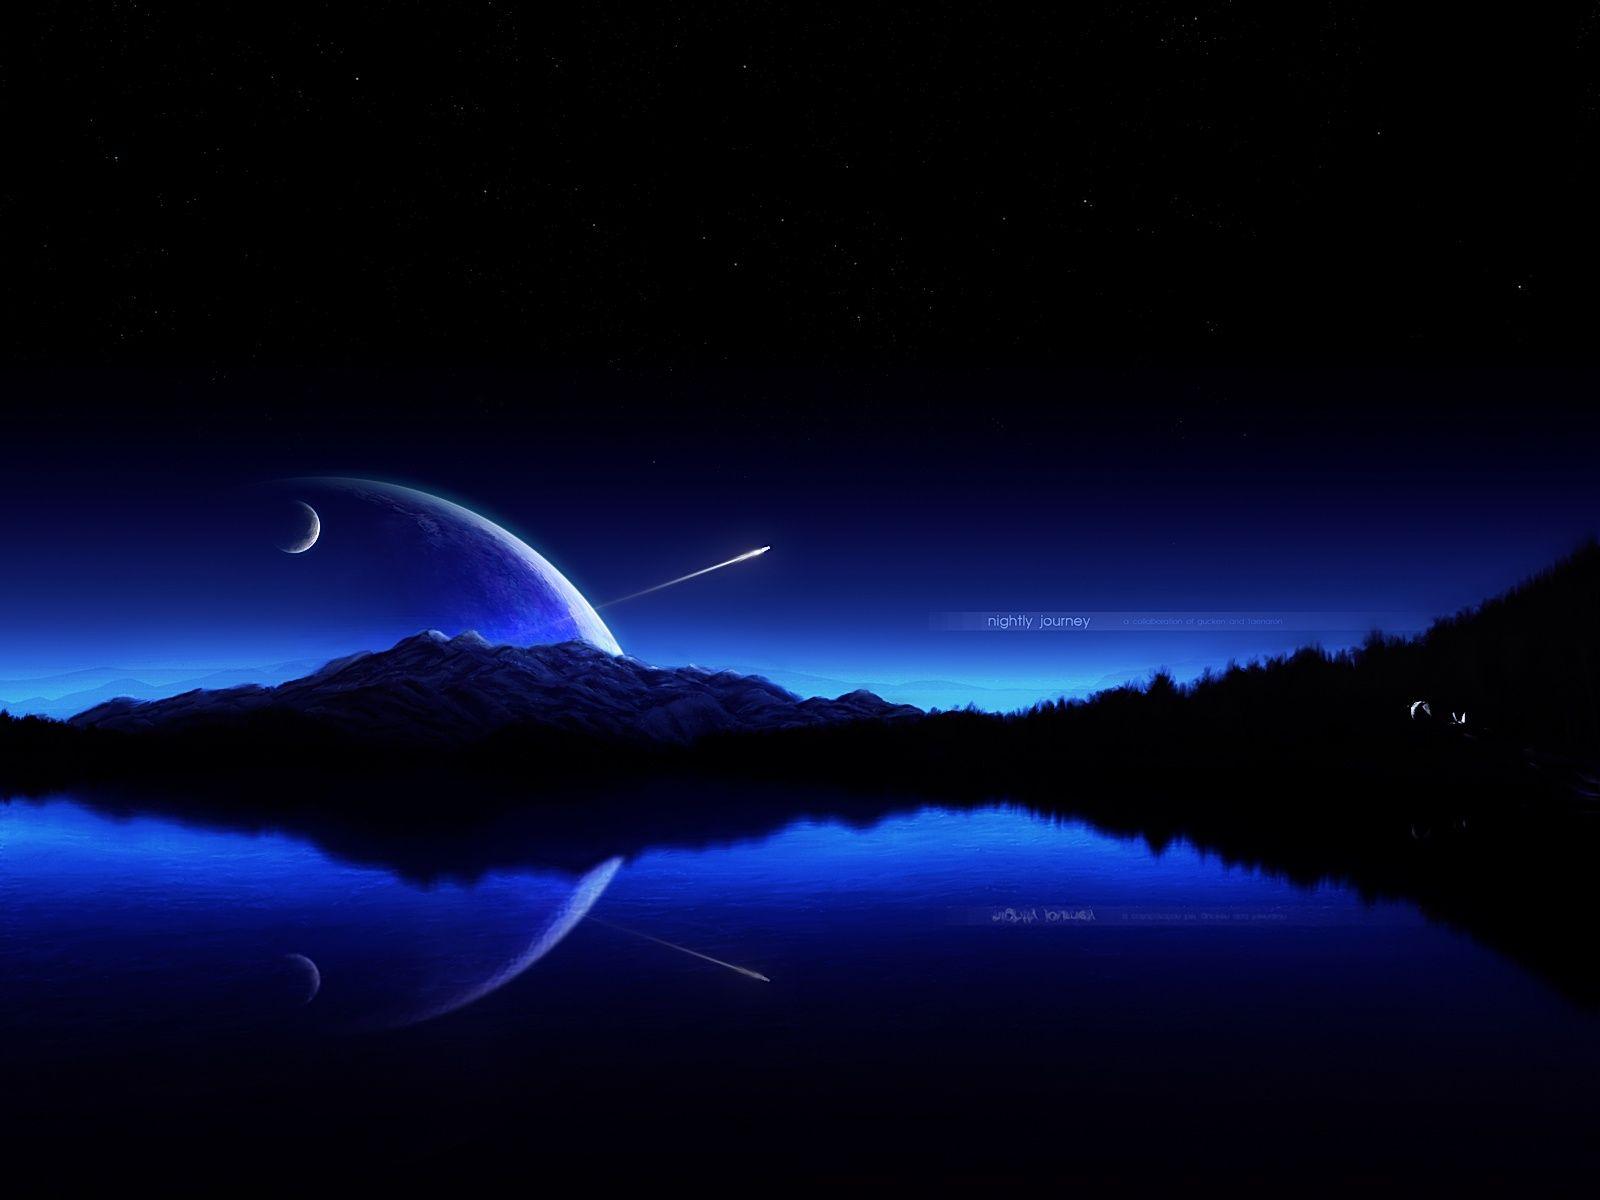 Moon Reflection On Water. Moon Reflection wallpaper